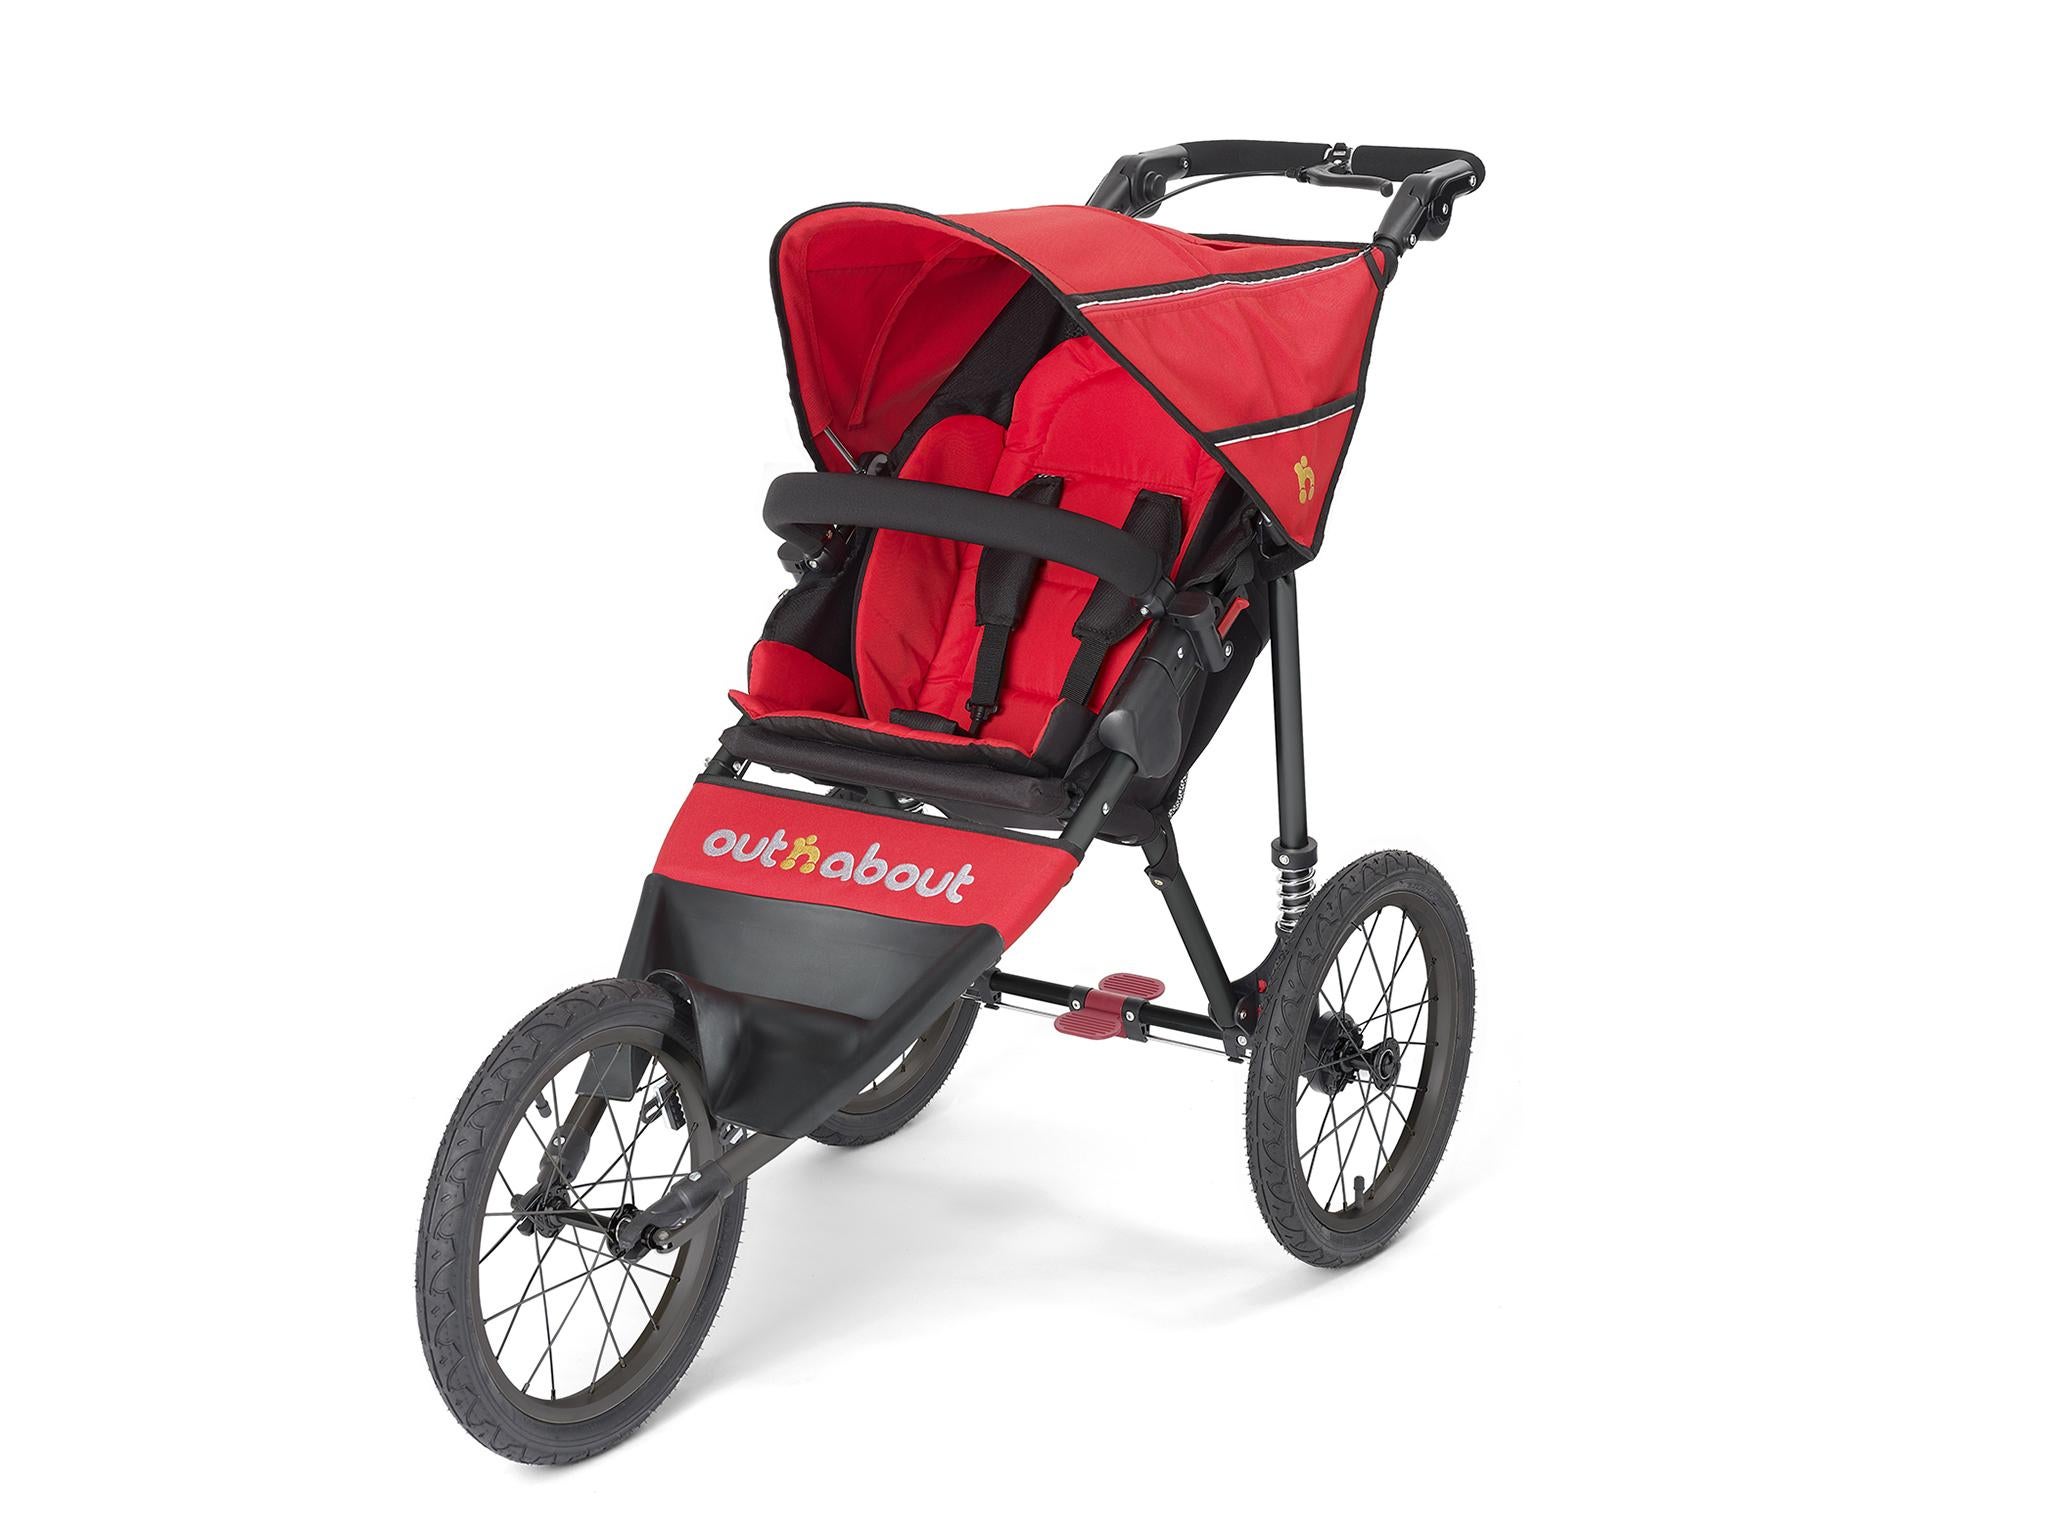 hauck running buggy review